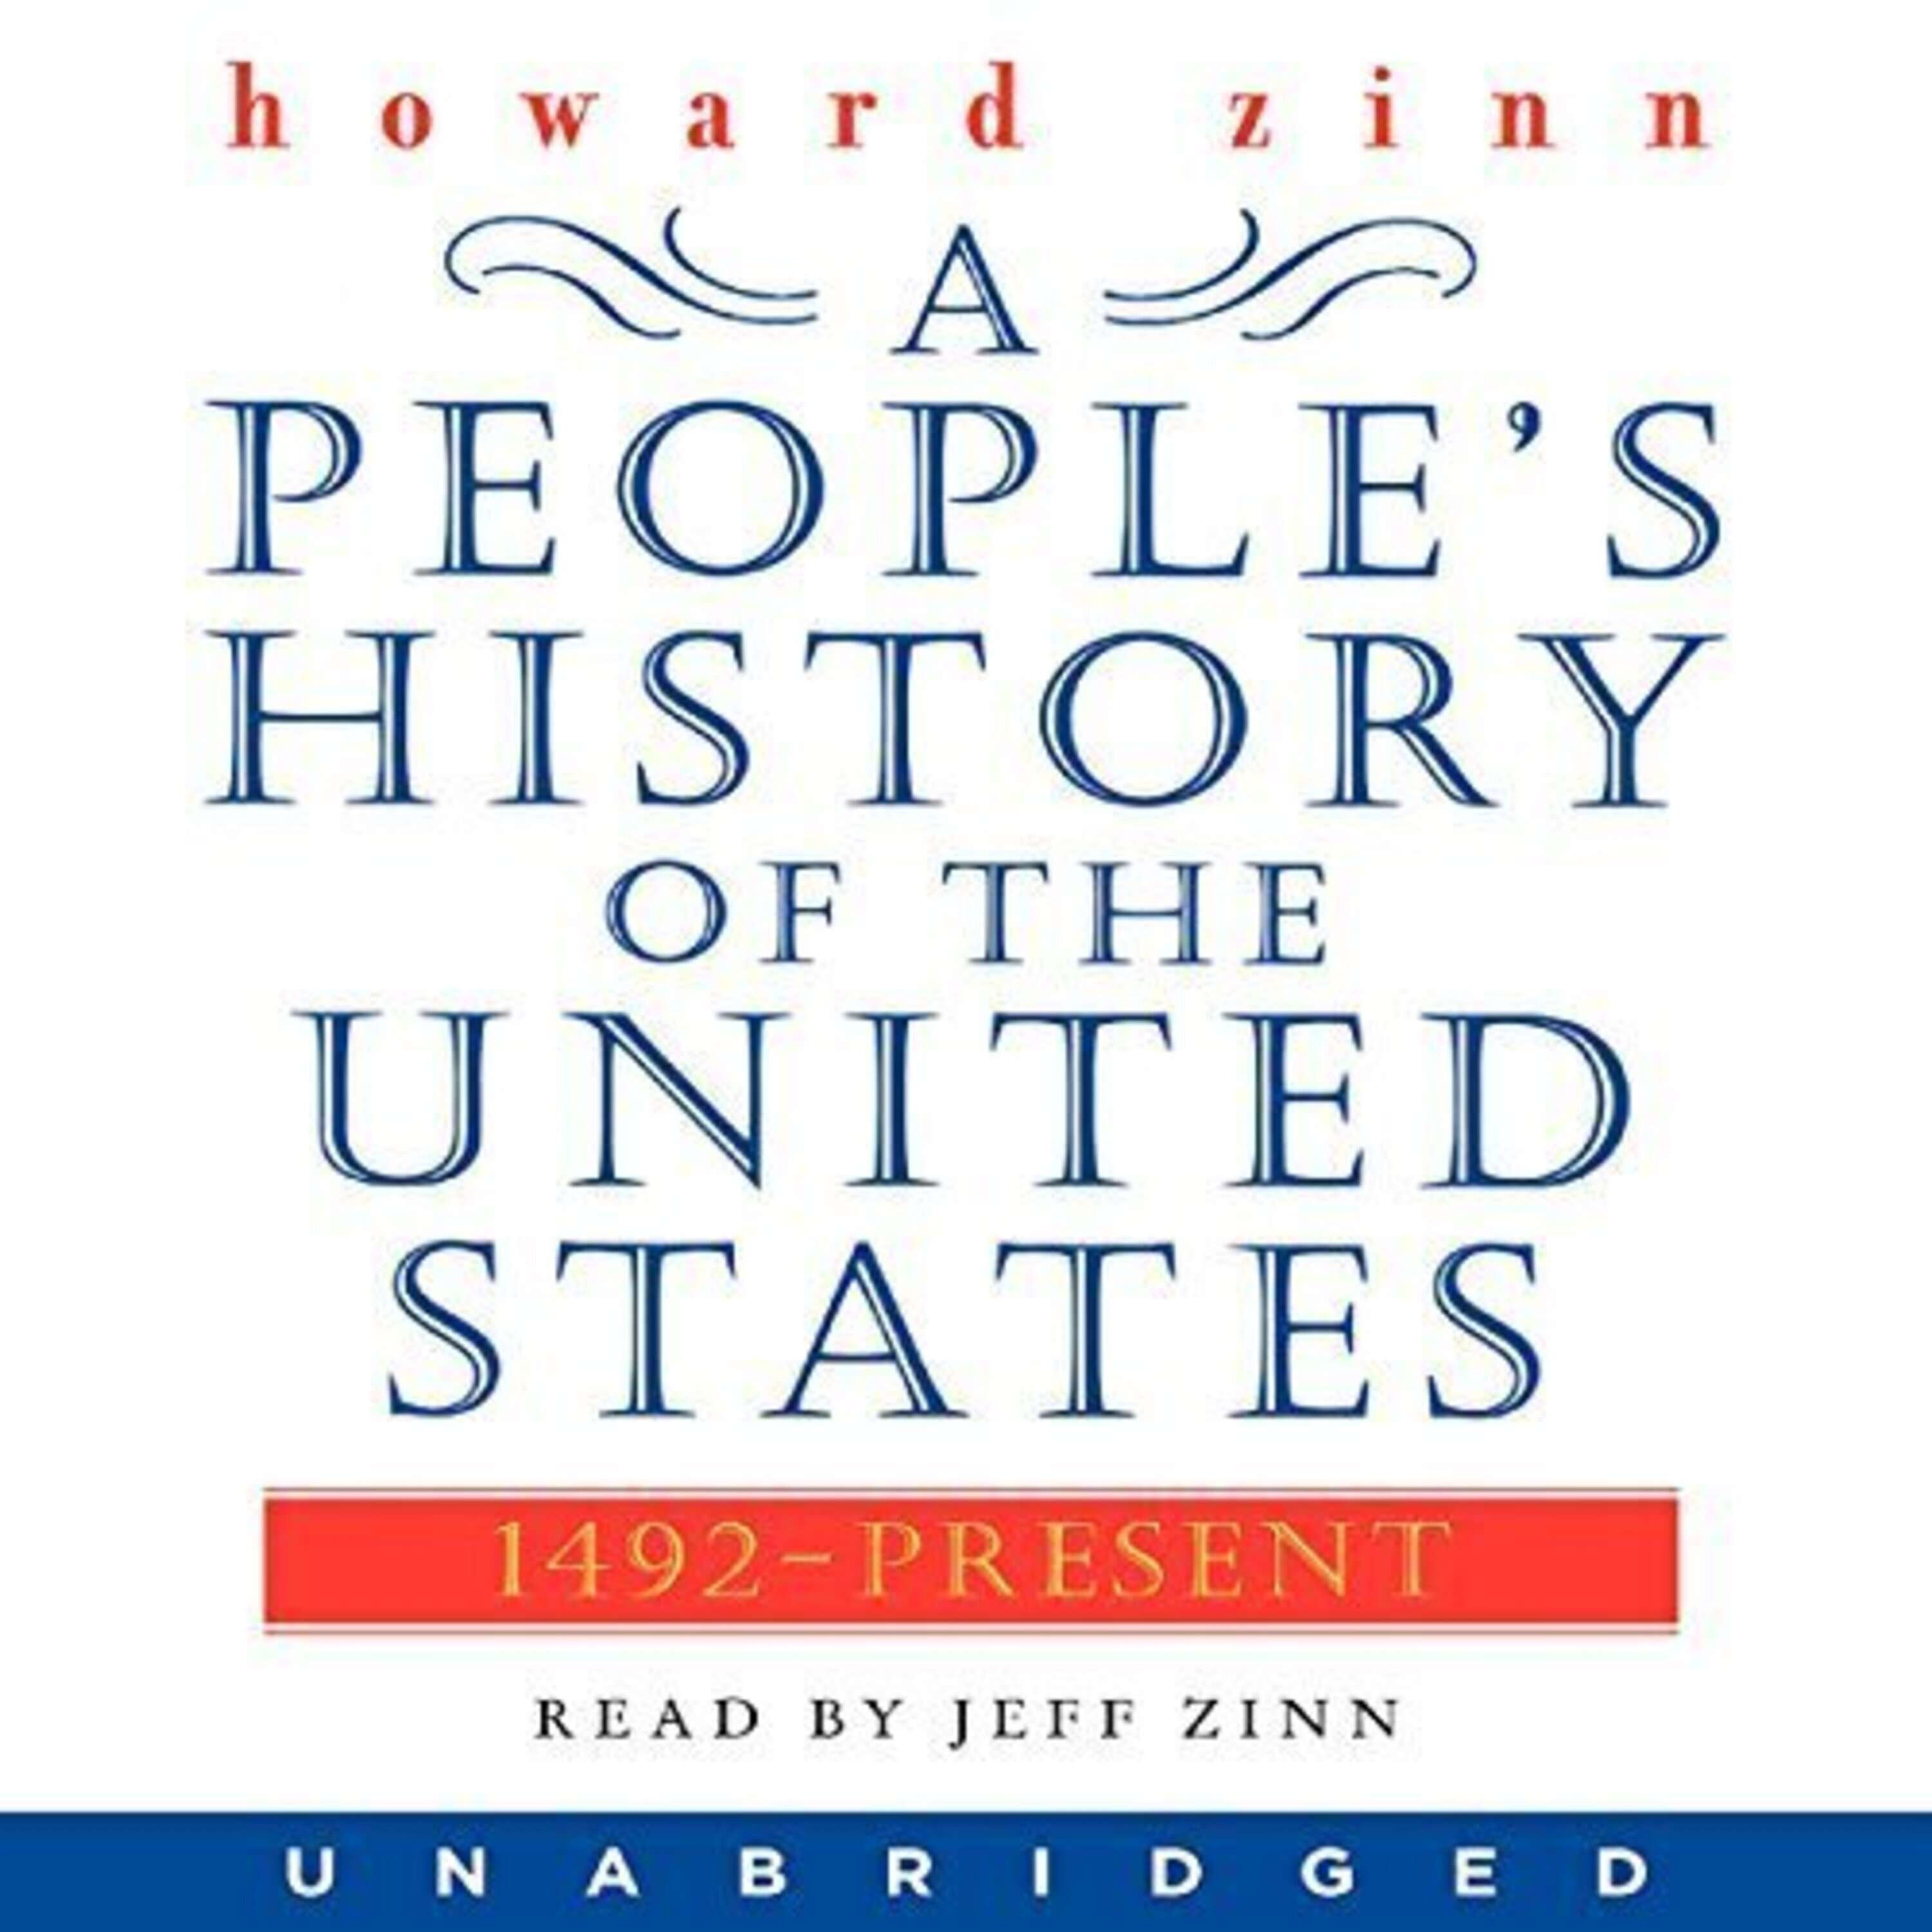 Part Four - A People’s History of the United States; Howard Zinn